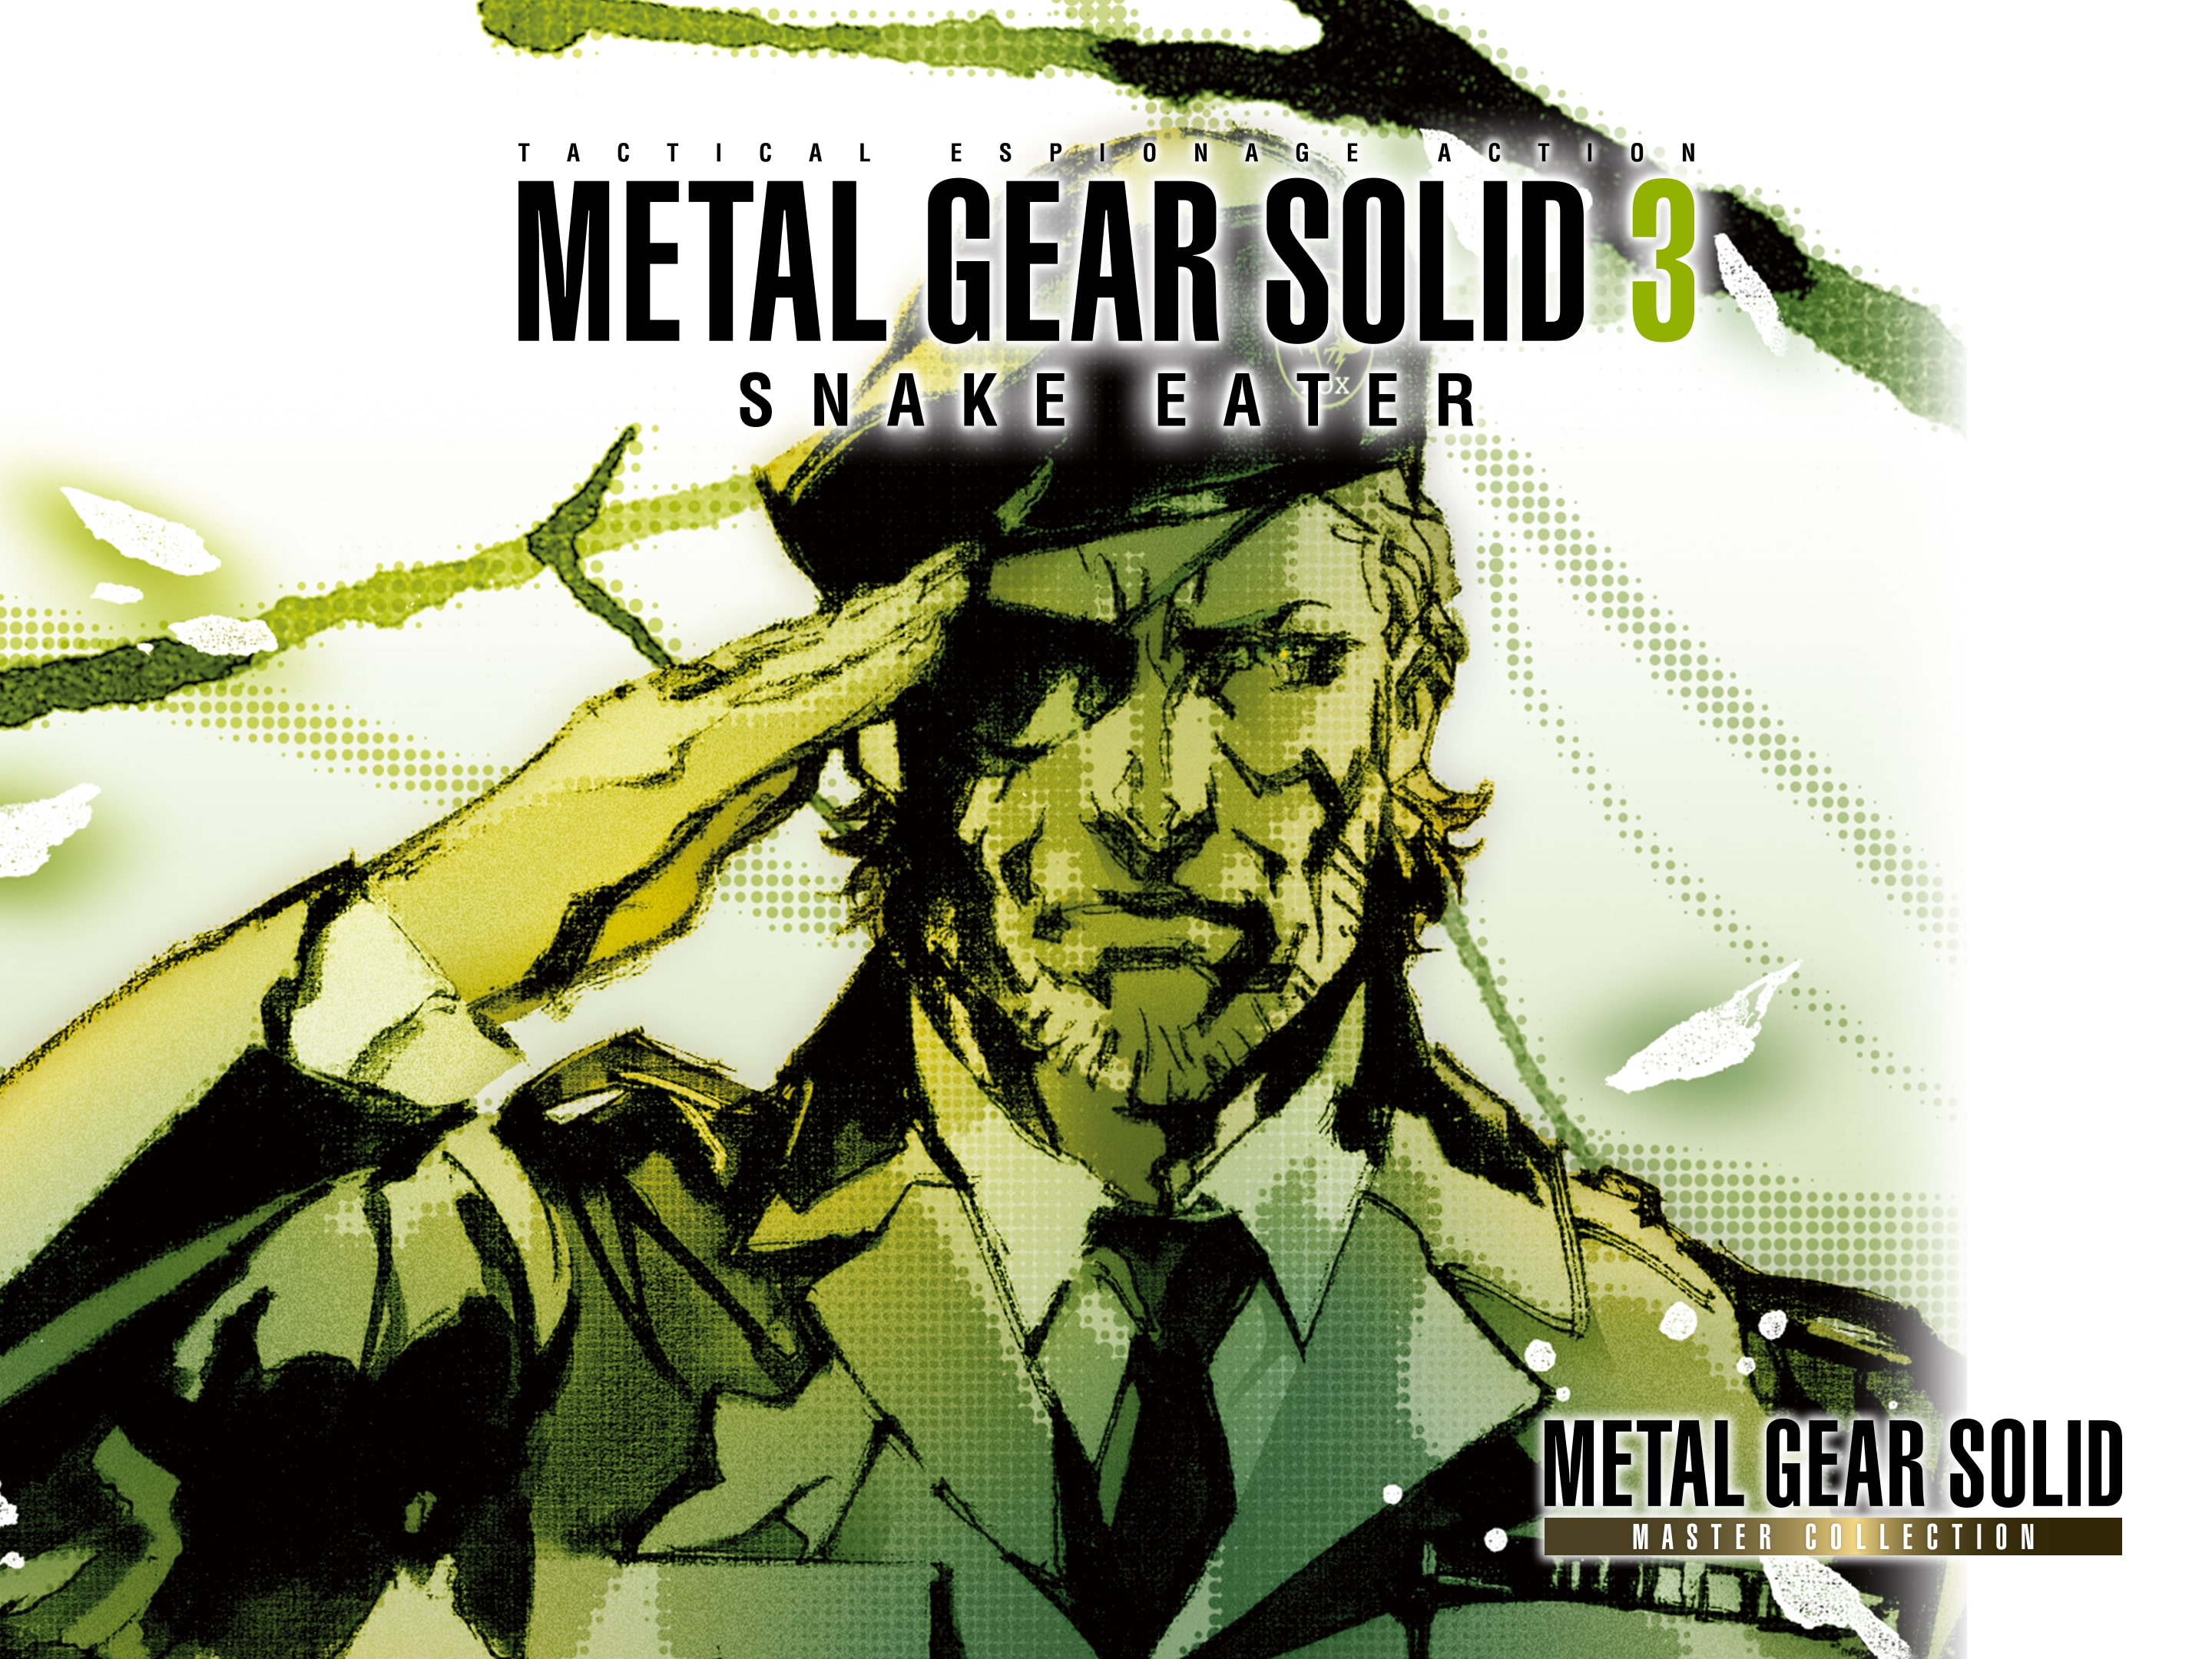 METAL GEAR SOLID: MASTER COLLECTION Vol.1, PlayStation 5 